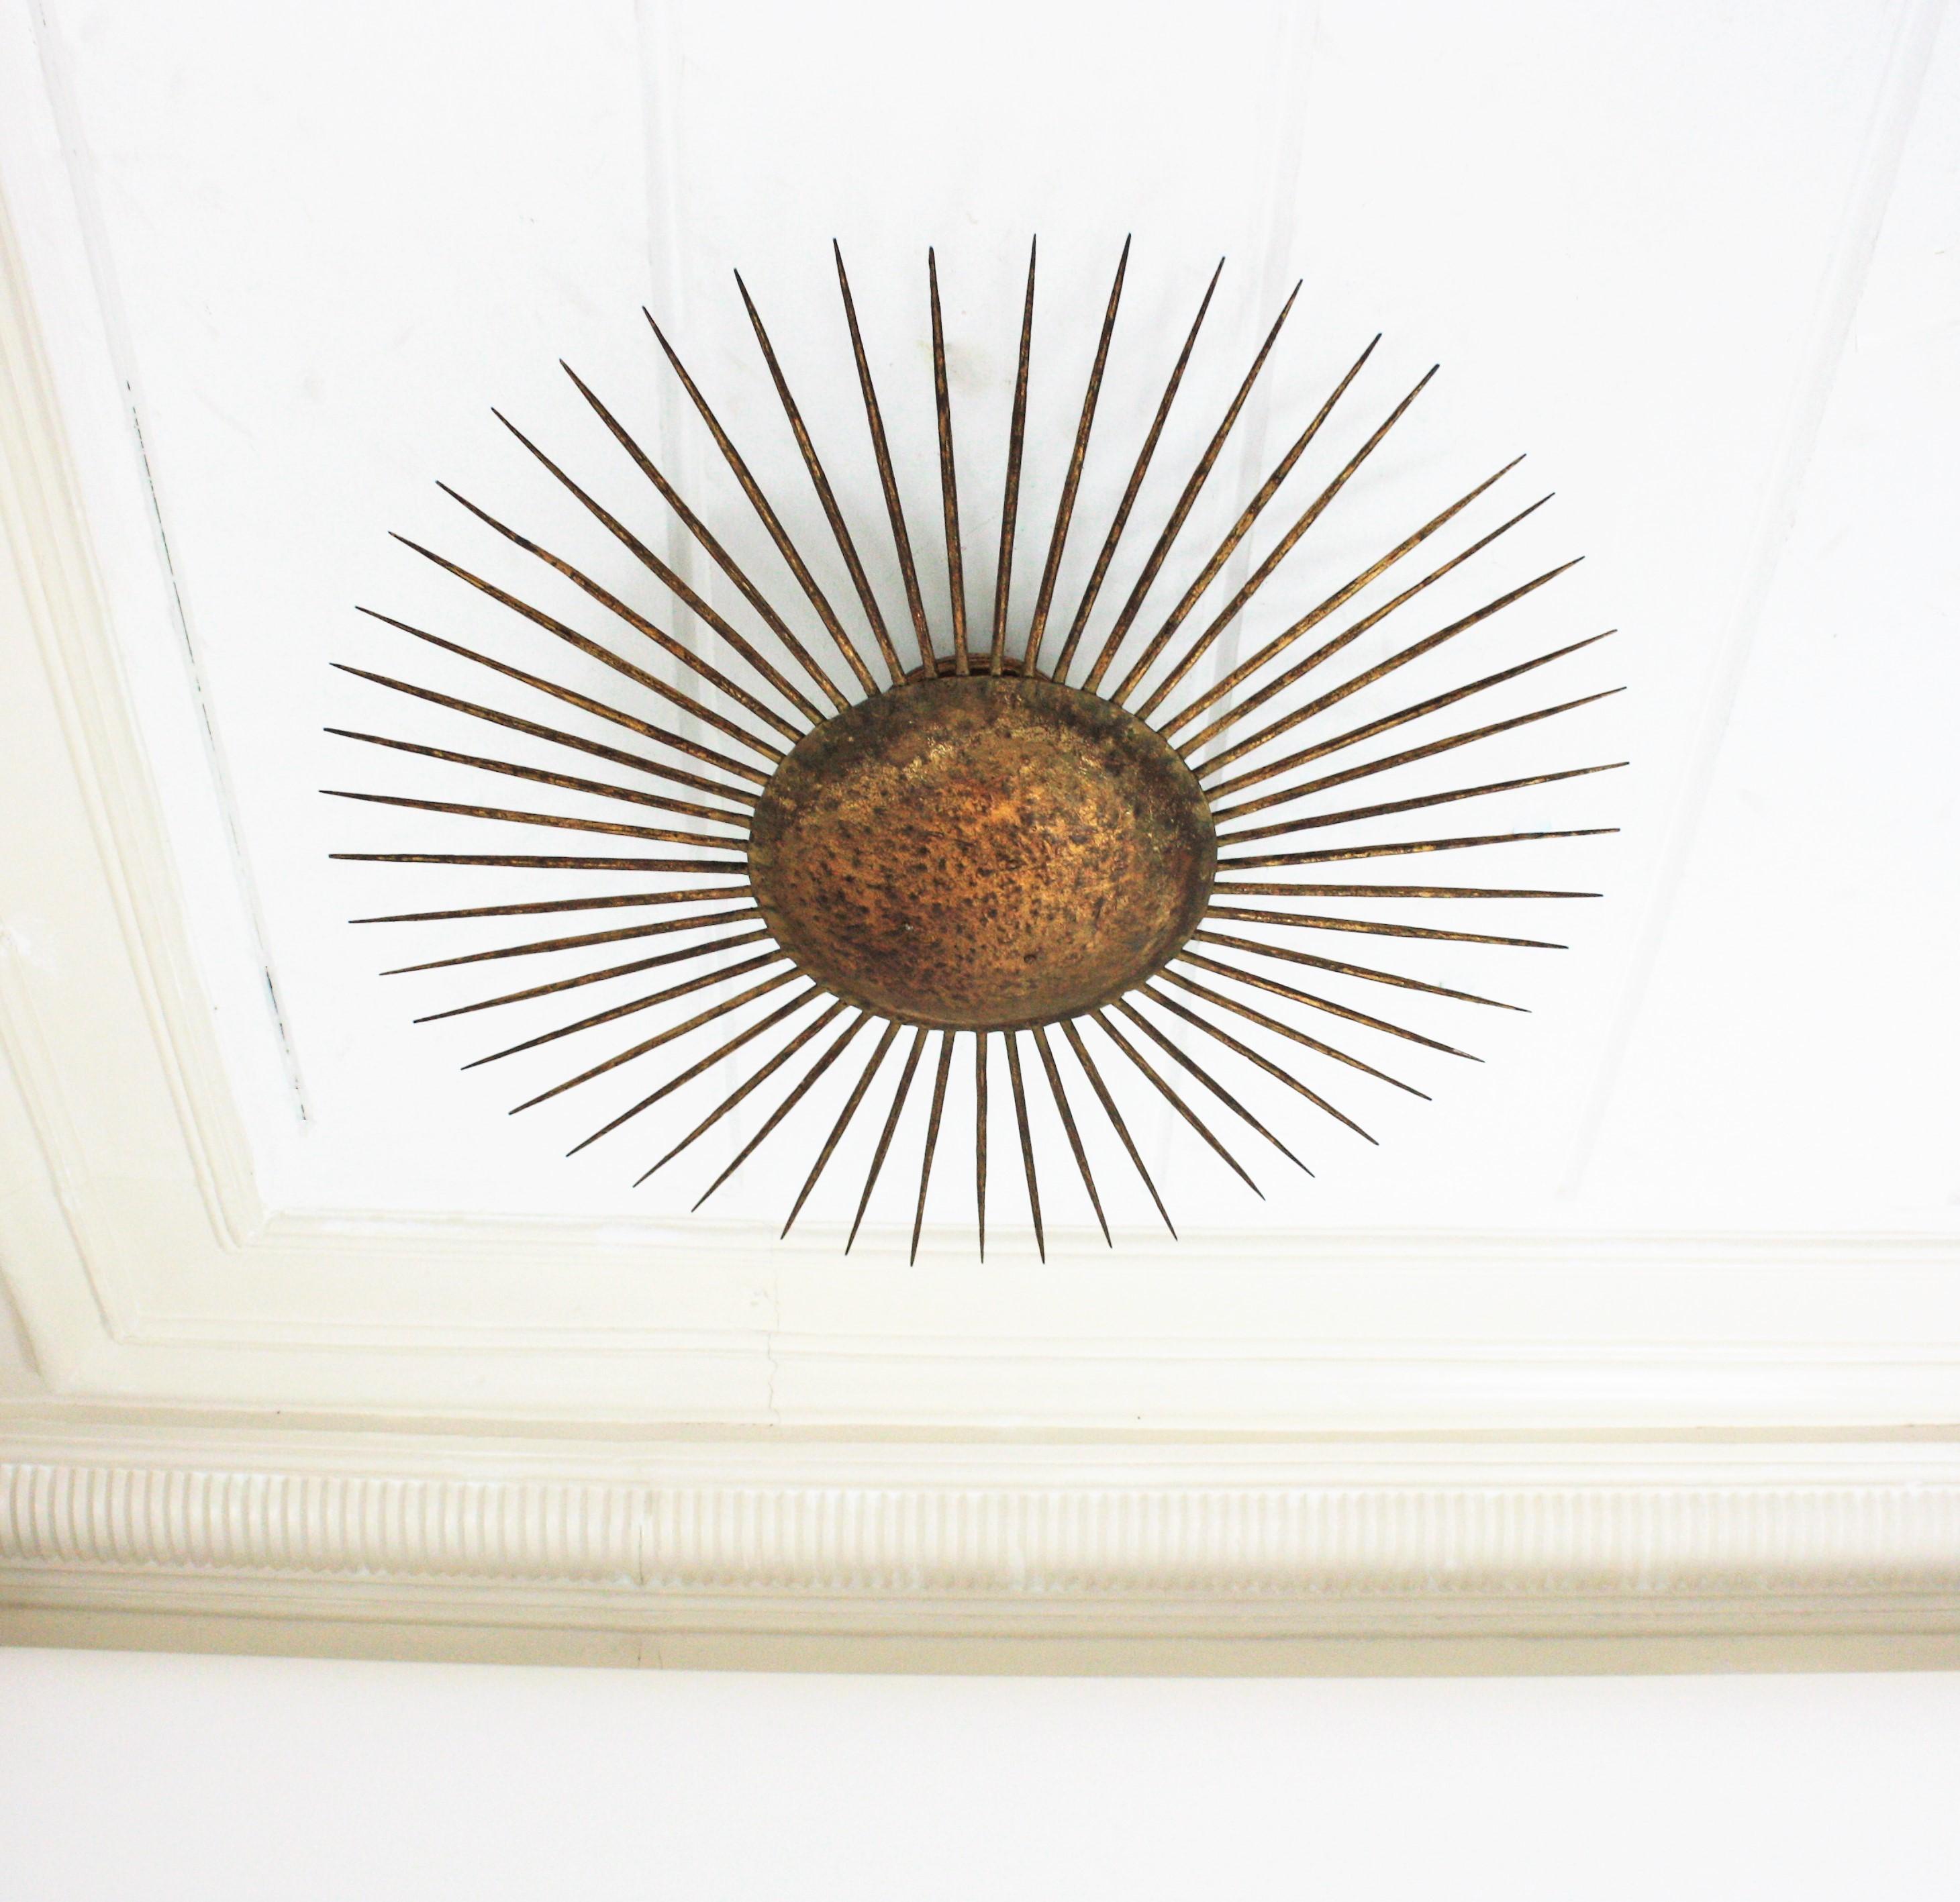 French Sunburst Ceiling Light Fixture in Gilt Wrought Iron, 1940s For Sale 3